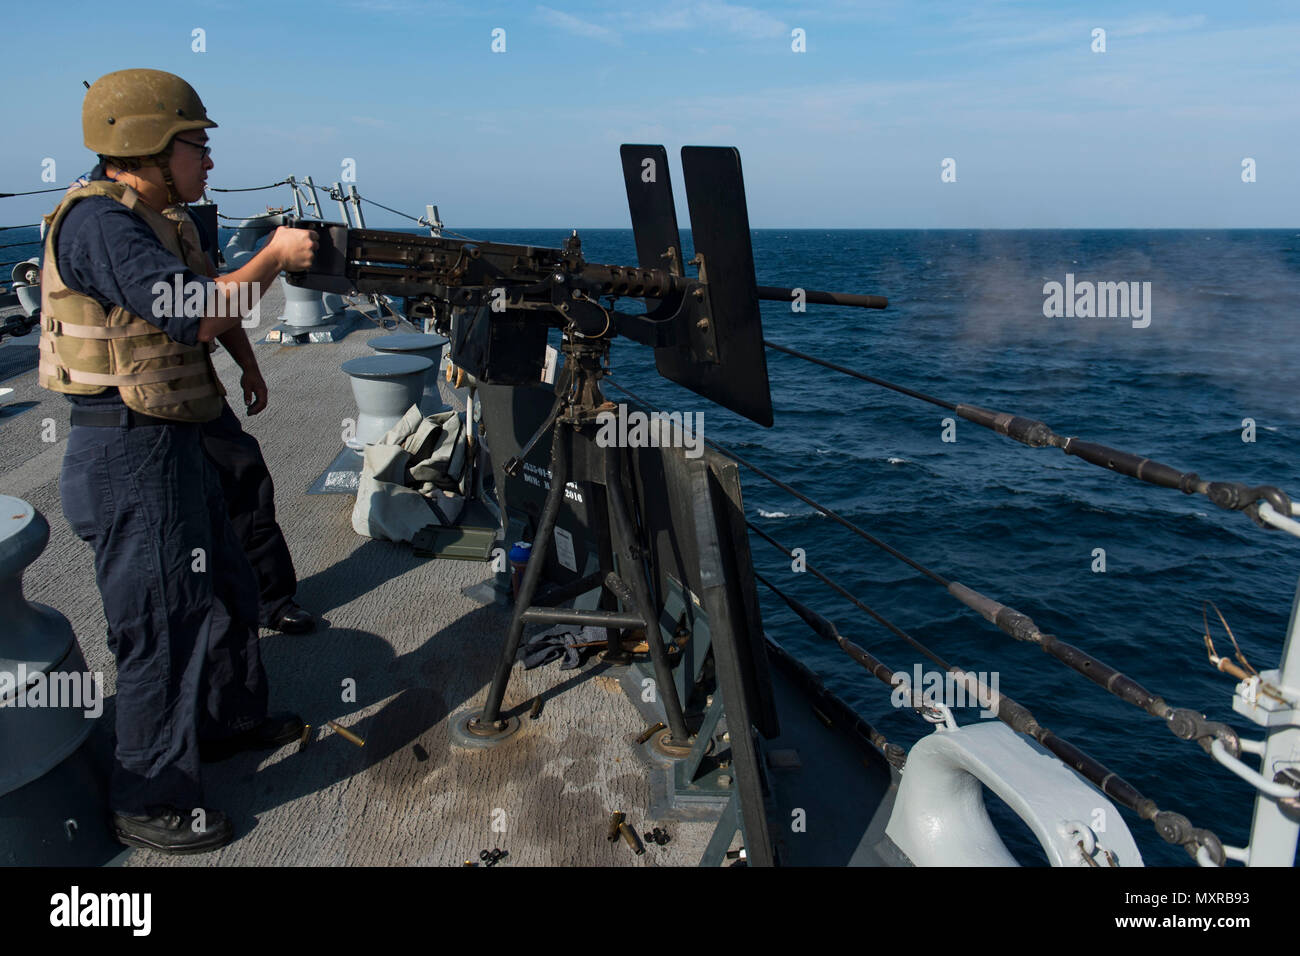 161121-N-EO381-248  ARABIAN GULF (Nov. 21, 2016) Petty Officer 3rd Class Alexander Lee, assigned to the guided-missile destroyer USS Nitze (DDG 94), fires a .50-caliber machine gun during a live fire exercise. Lee serves onboard Nitze as an electronics technician and is responsible for maintaining, repairing and calibrating shipboard electronic equipment. Nitze, deployed as part of the Eisenhower Carrier Strike Group, is supporting maritime security operations and theater security cooperation efforts in the U.S. 5th Fleet area of operations. (U.S. Navy photo by Petty Officer 3rd Class Casey J. Stock Photo